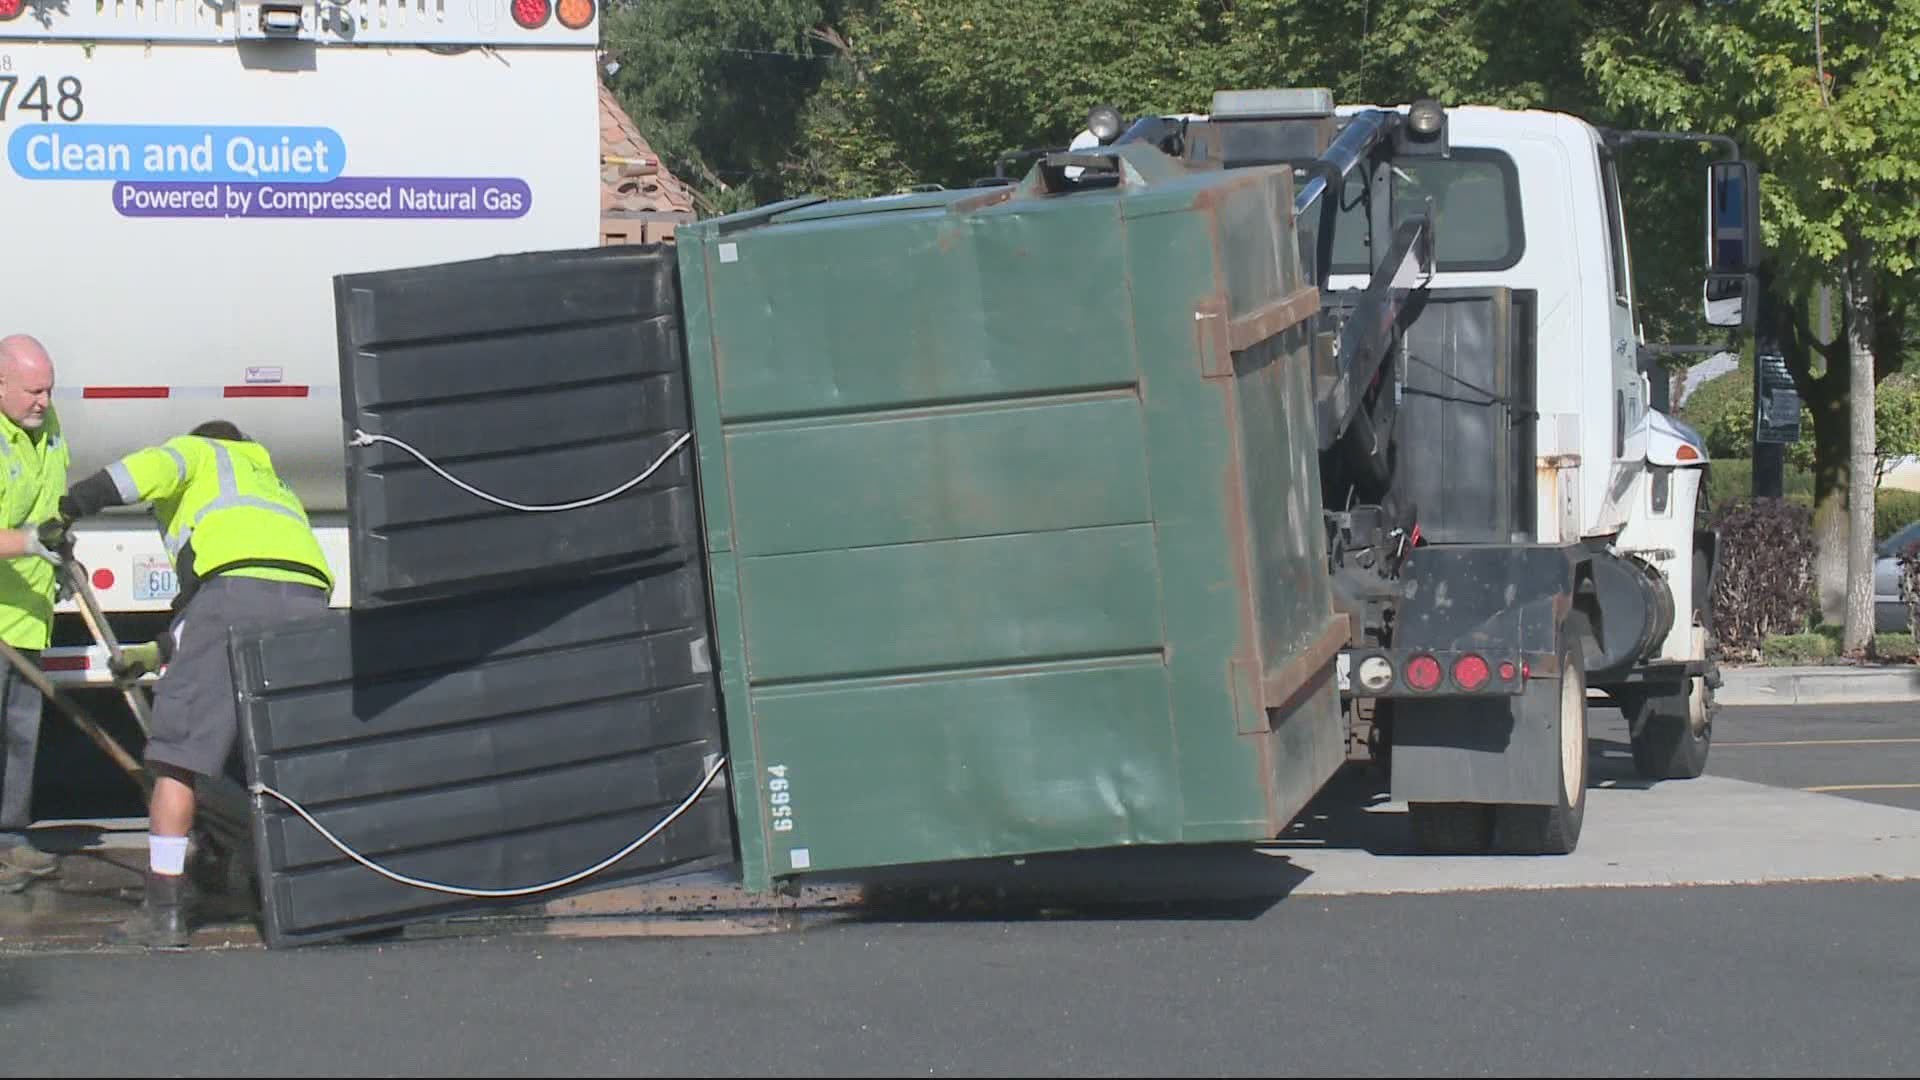 A garbage crew heard screaming coming from inside their truck while they were emptying dumpsters near the Olive Garden on North Newport Highway.